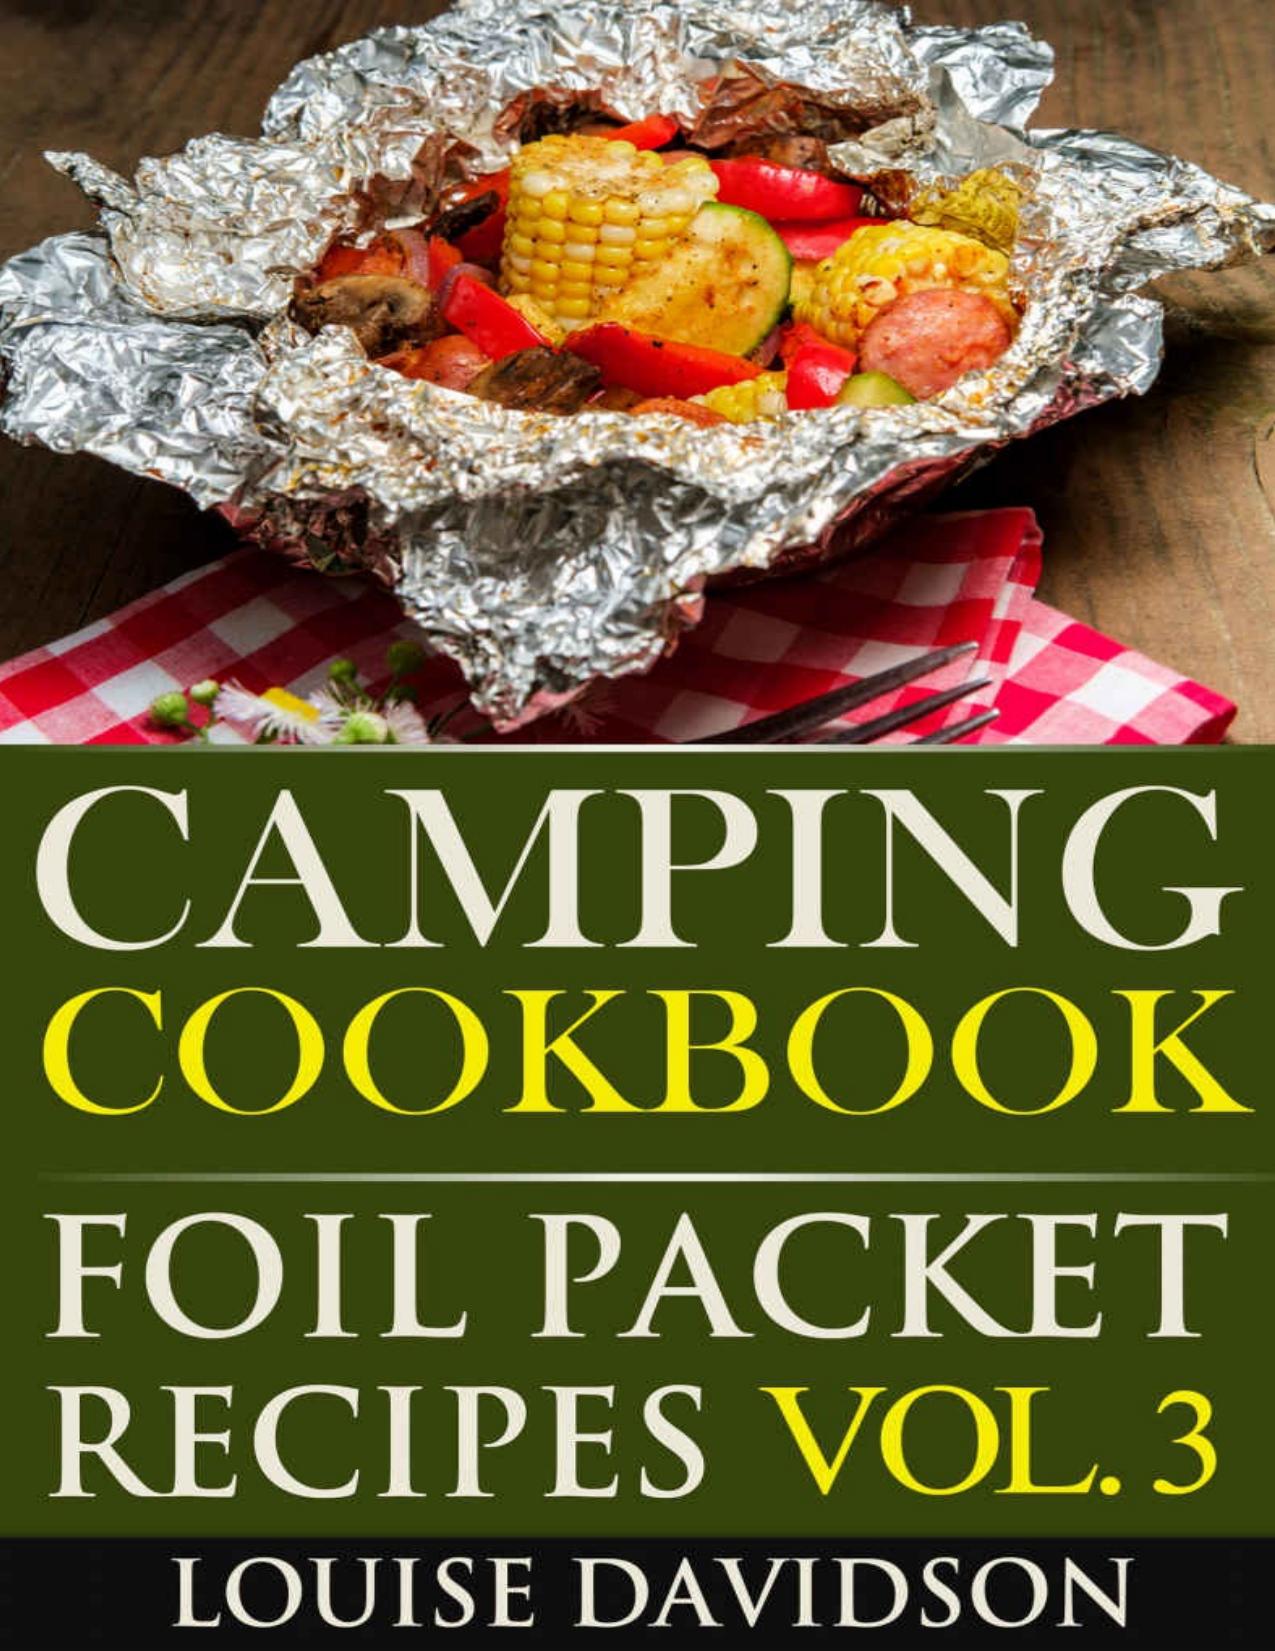 Camping Cookbook Foil Packet Recipes Vol. 3 by Davidson Louise